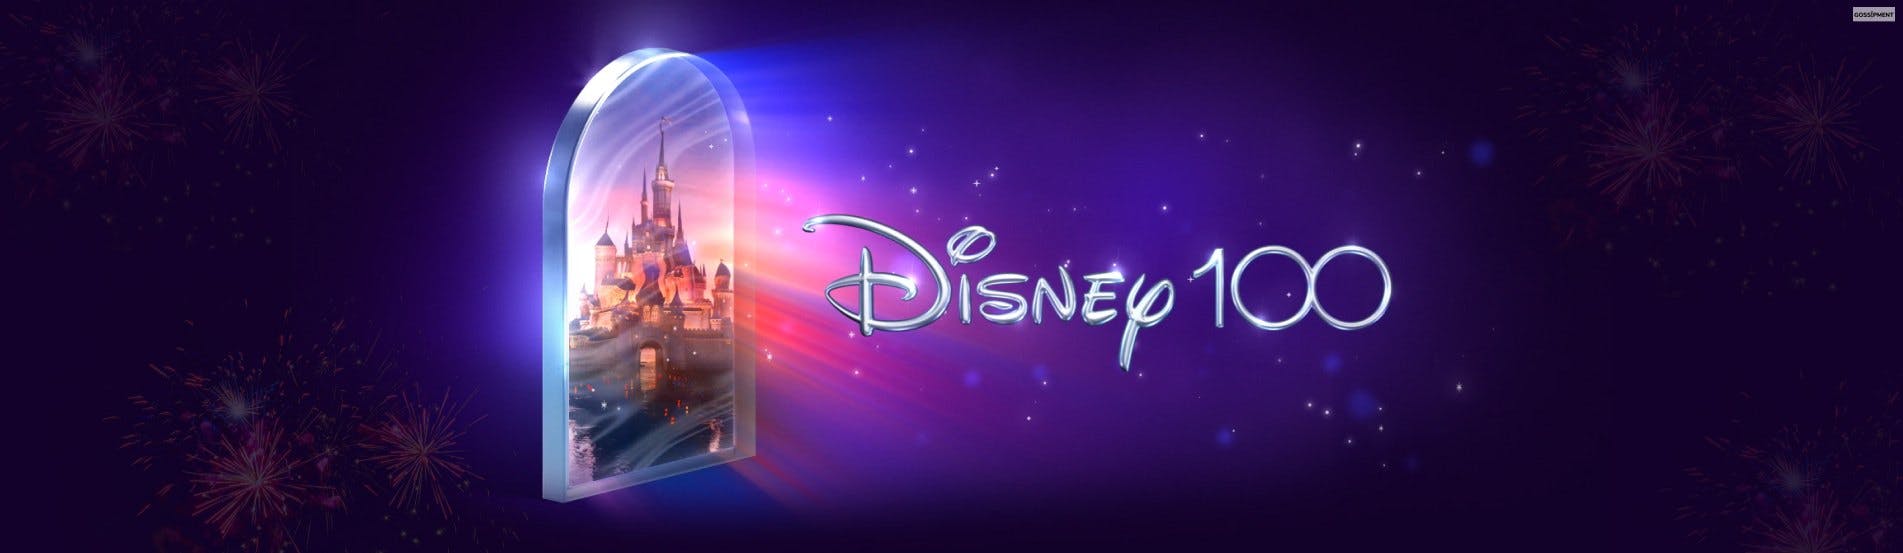 Cover Image for <strong>Disney Turns 100 In 2023: Top Underrated Disney Movies To Watch This January</strong>